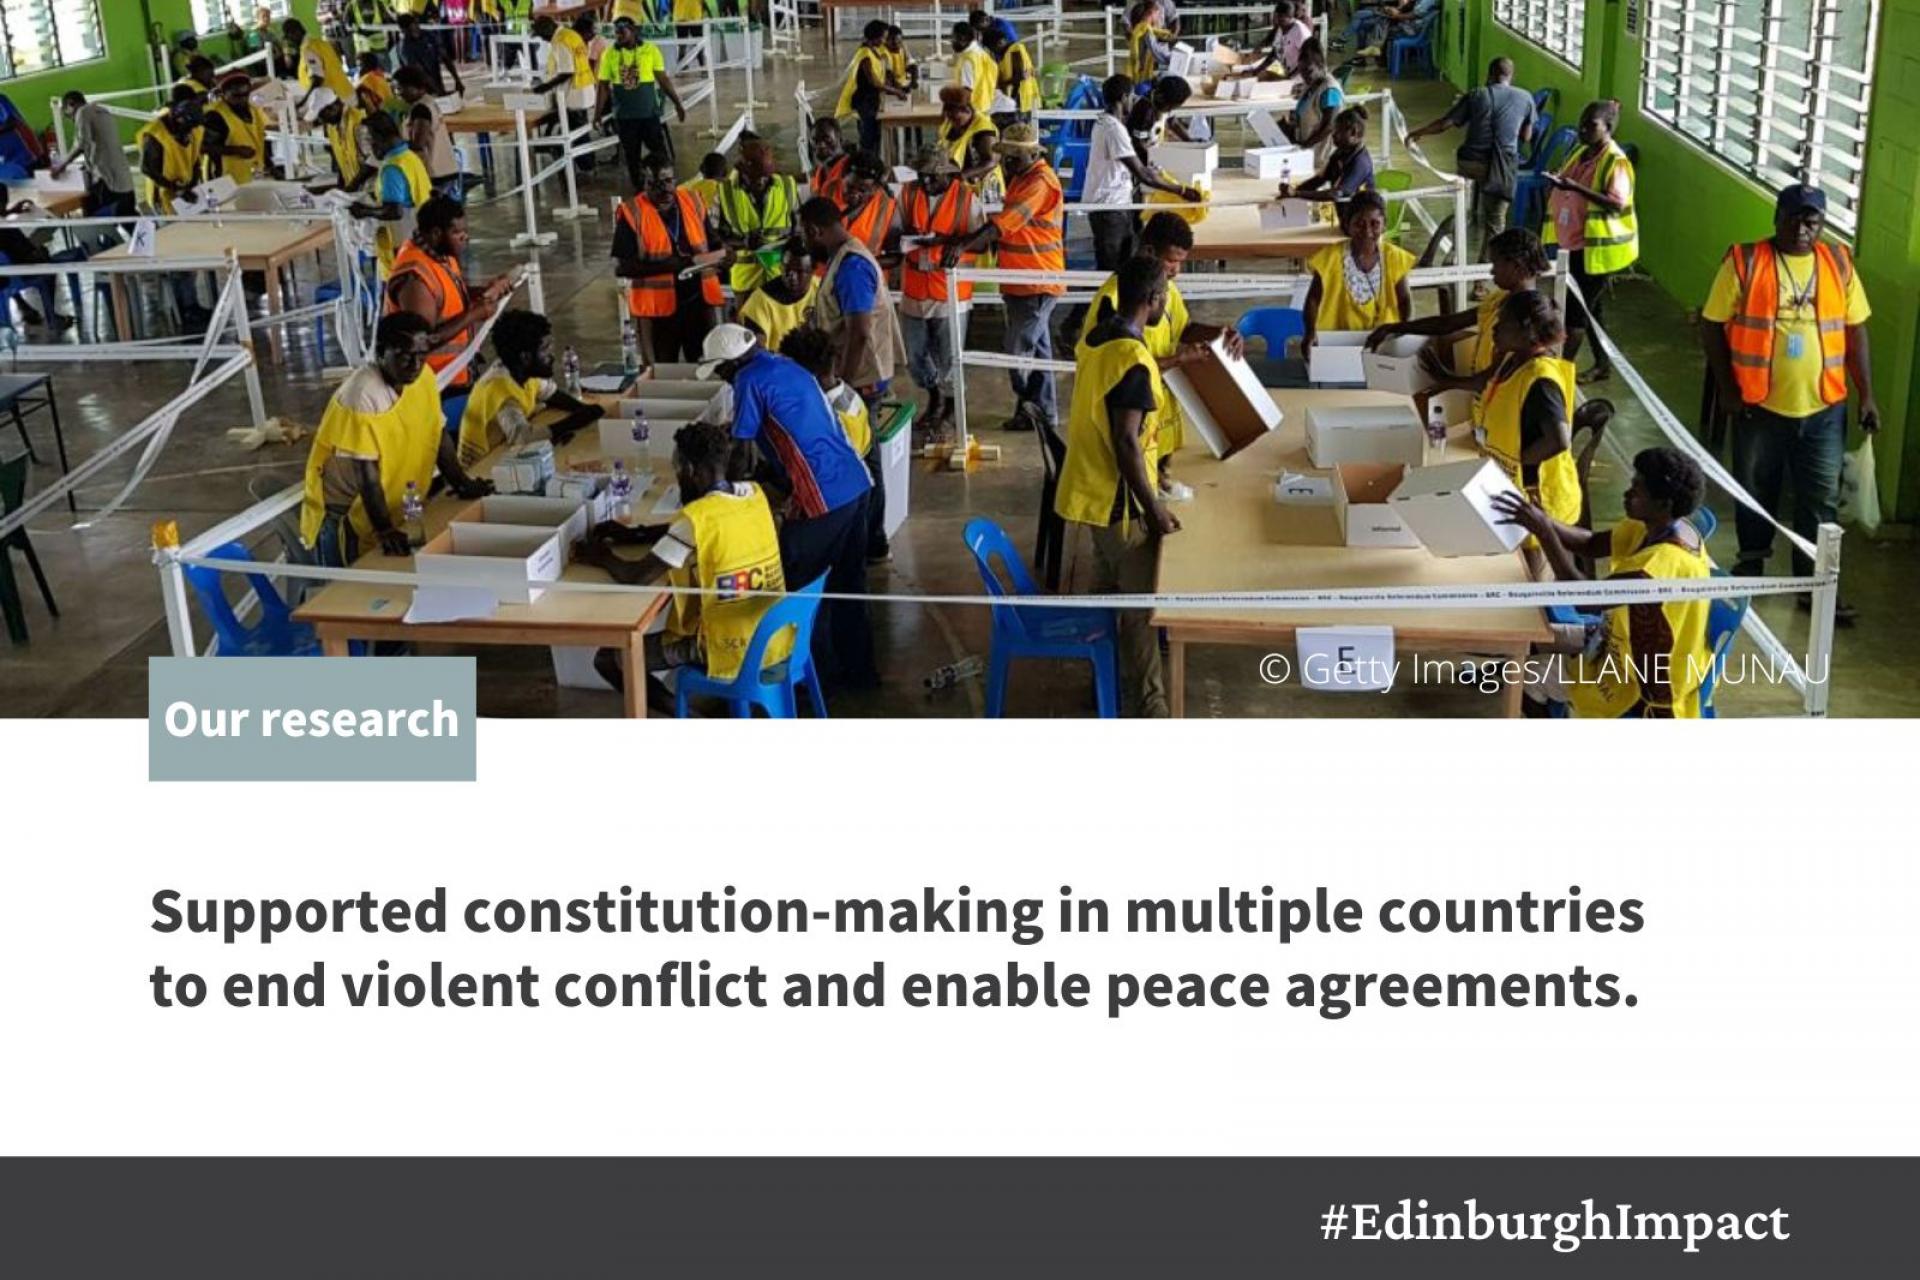 Our research supported constitution-making in multiple countries to end violent conflict and enable peace agreements.    